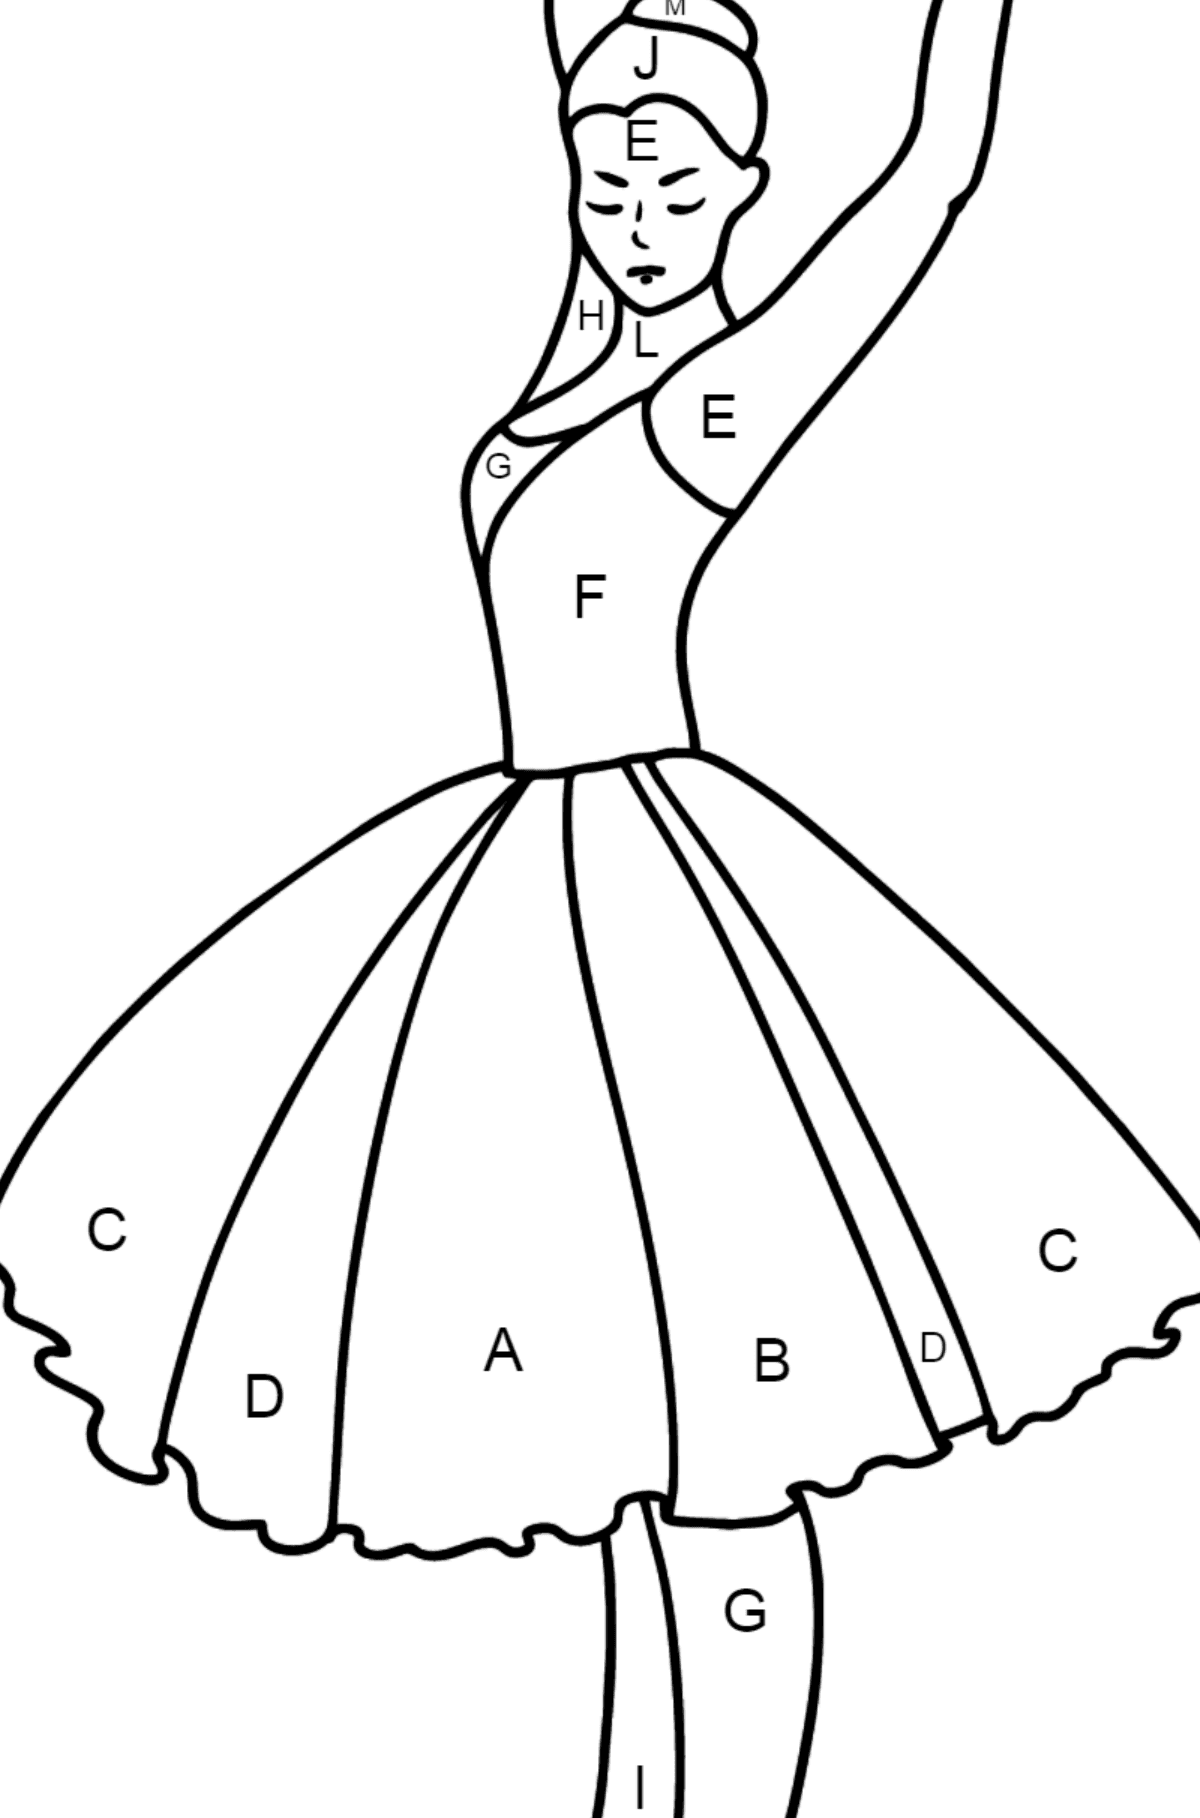 Ballerina Dancing coloring page - Coloring by Letters for Kids